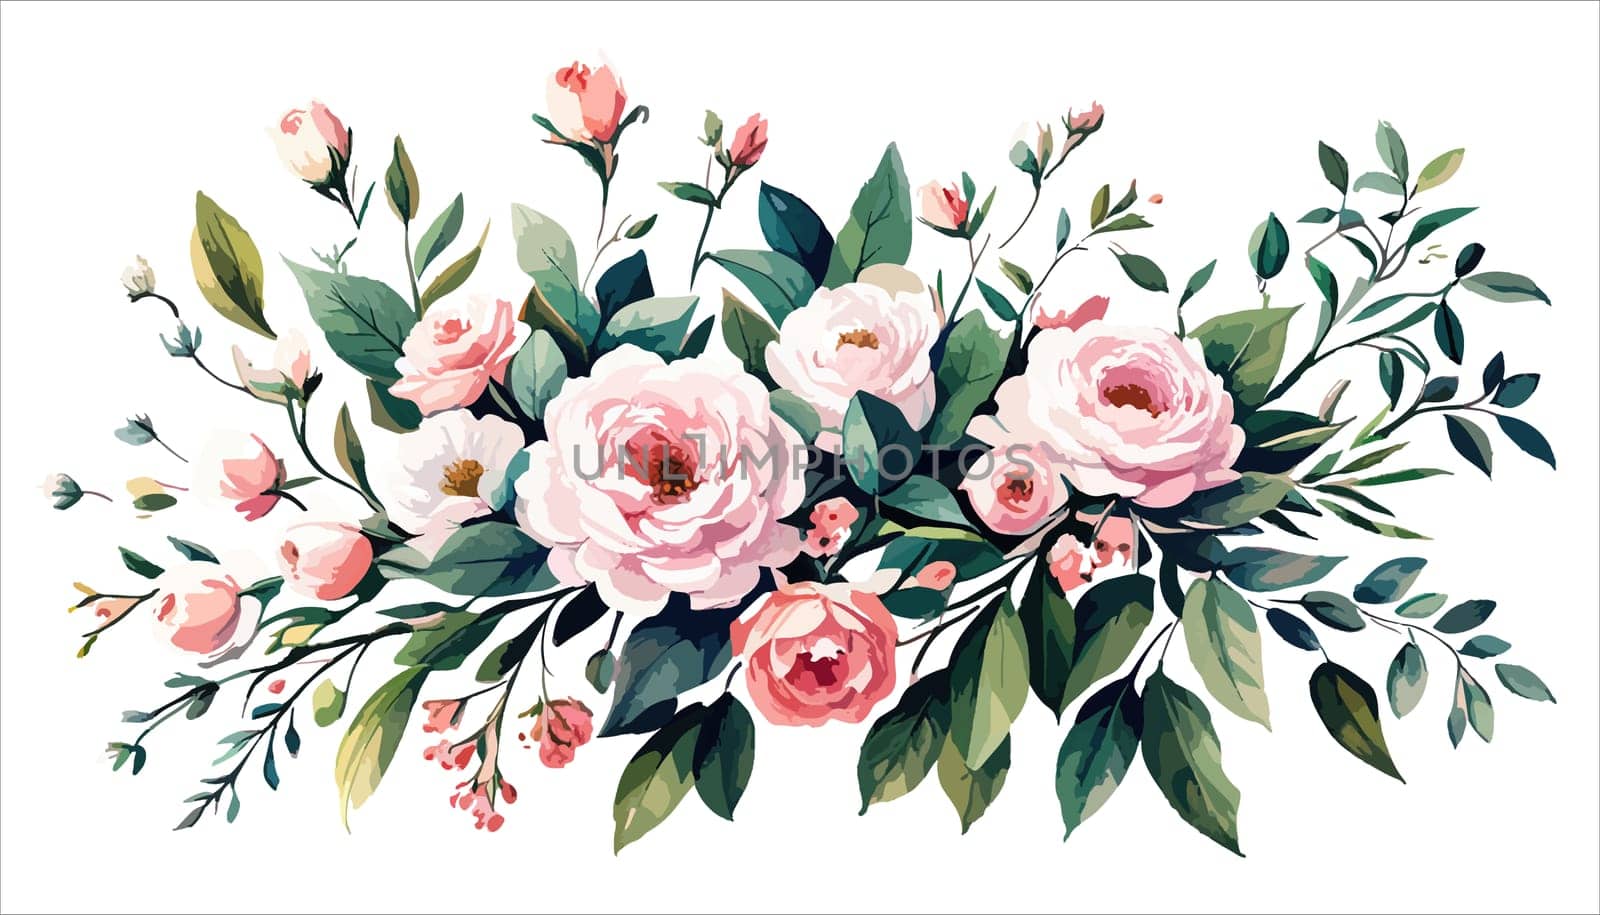 illustration blooming pink roses flowers for your design. Wedding romantic elegant date marriage symbol. Rose and green leaves, bouquet for your template, design of invitation card.